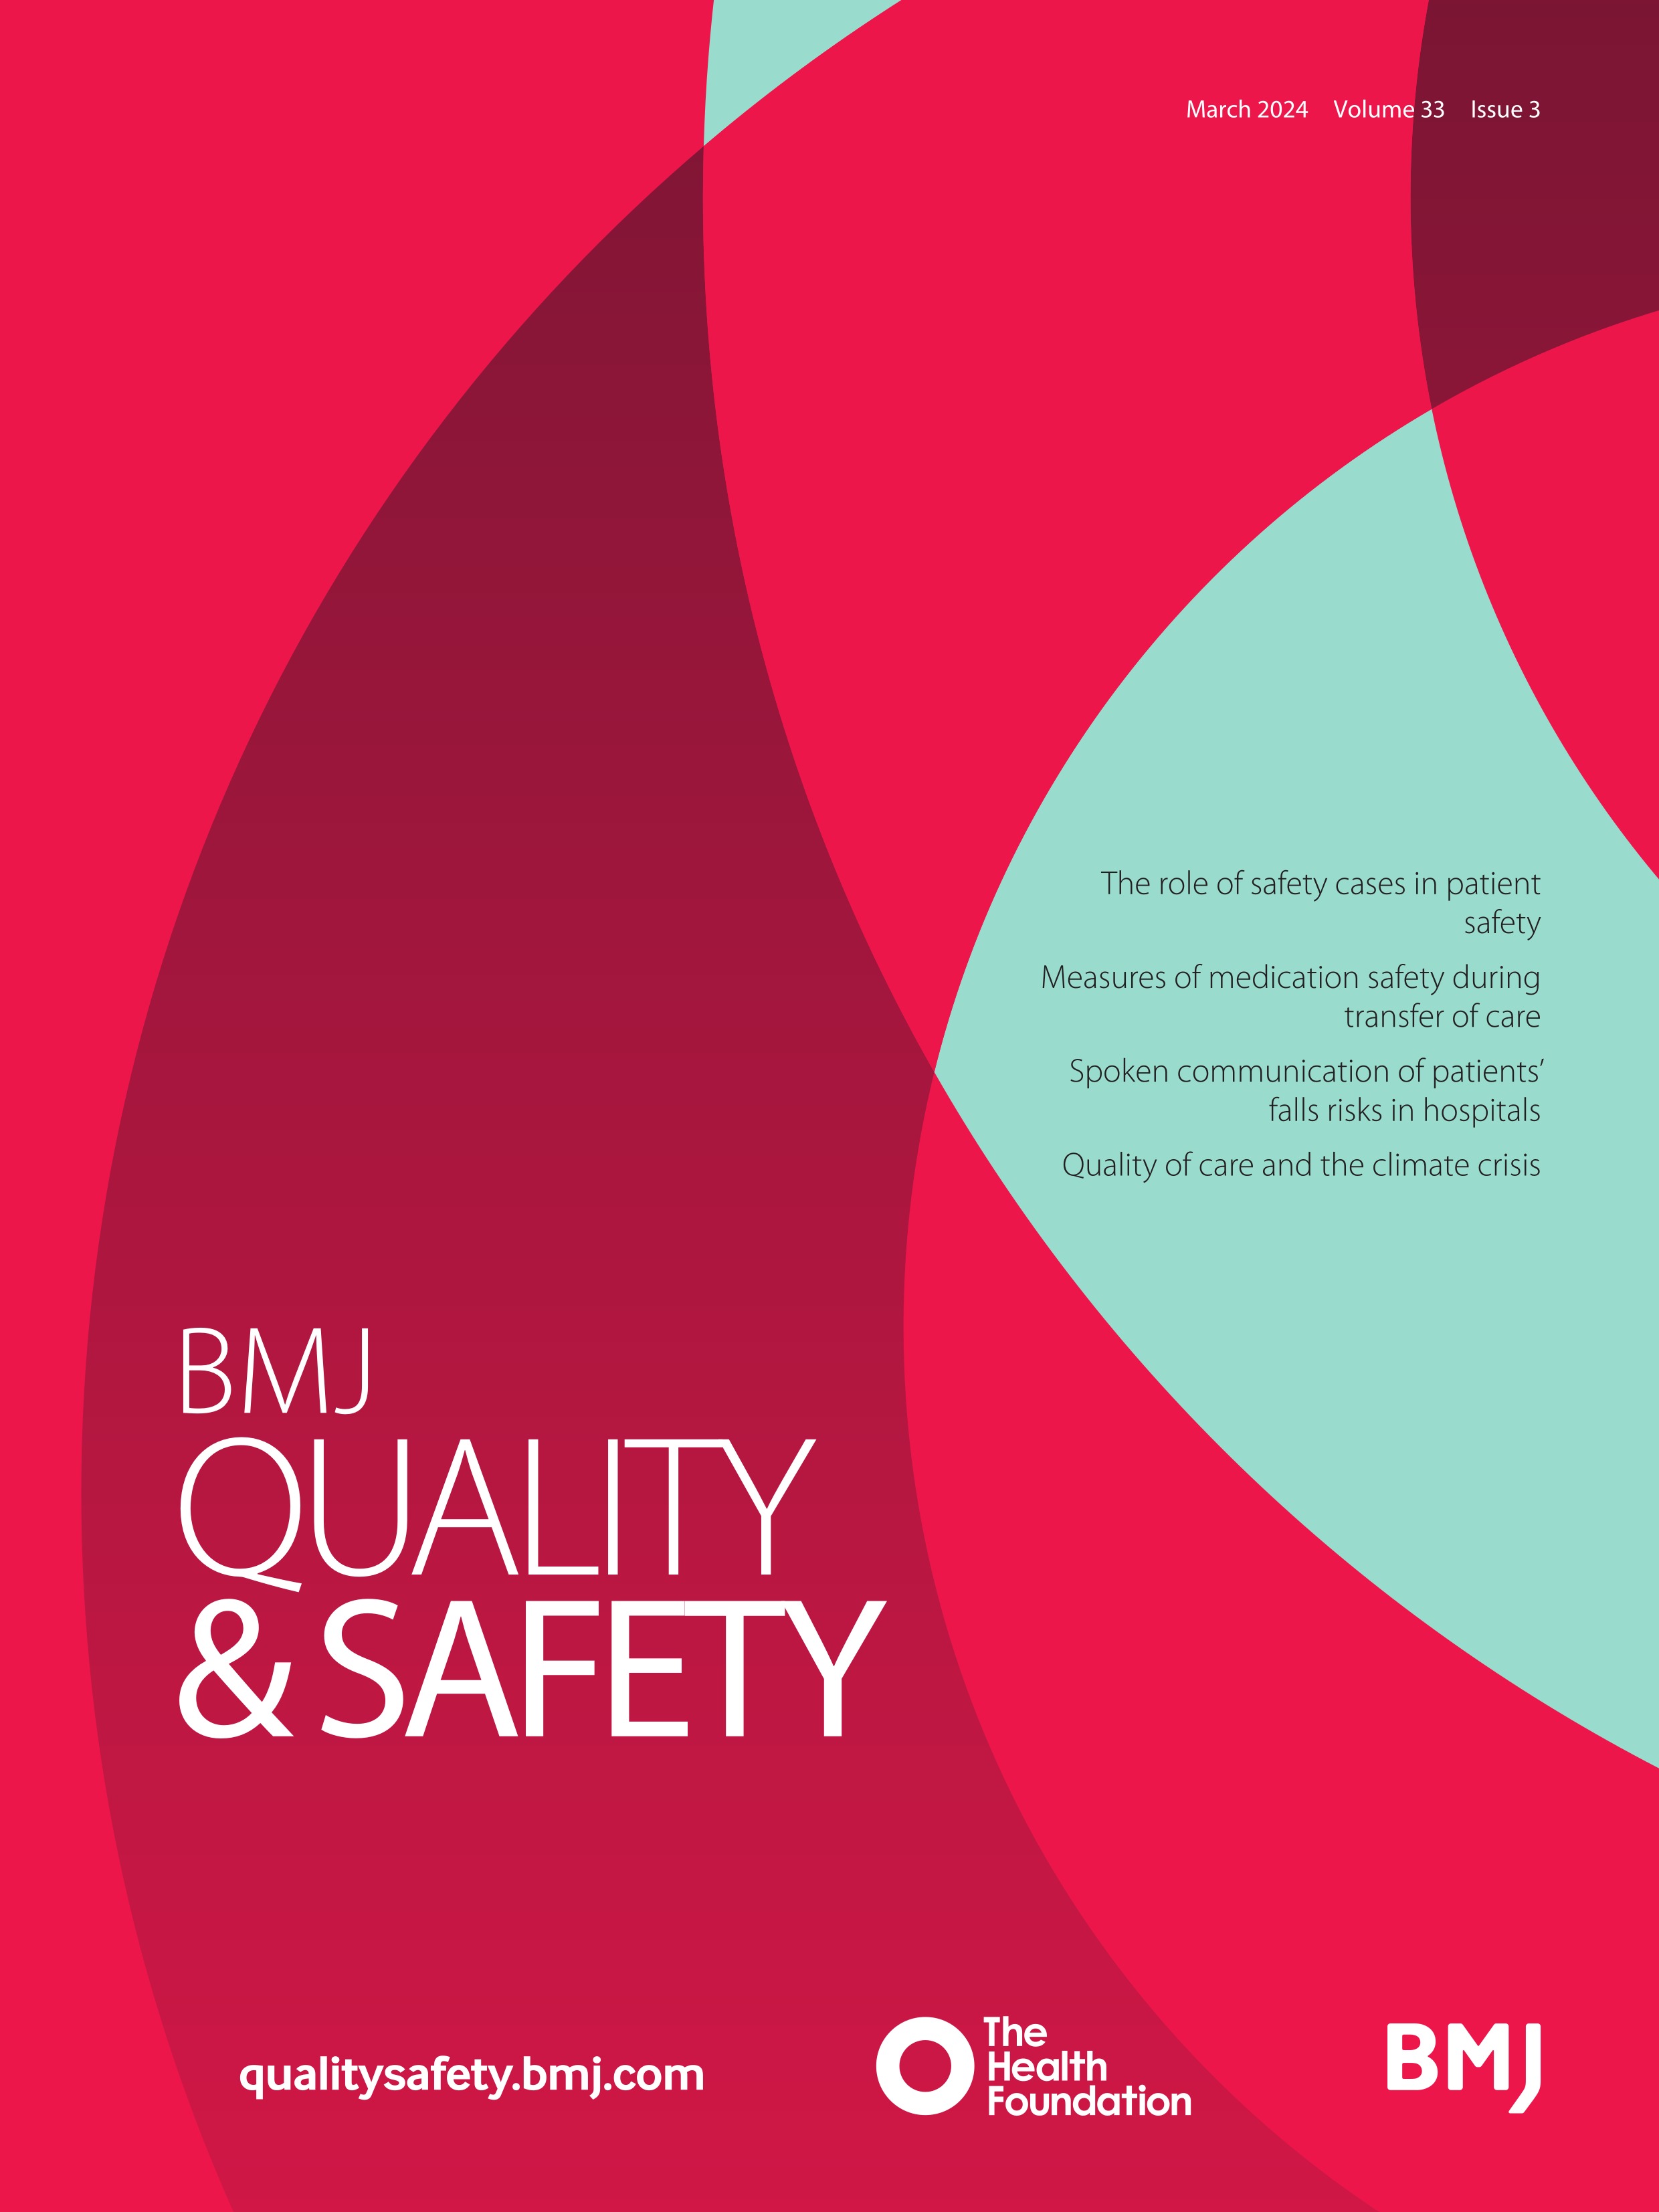 Identifying and mapping measures of medication safety during transfer of care in a digital era: a scoping literature review